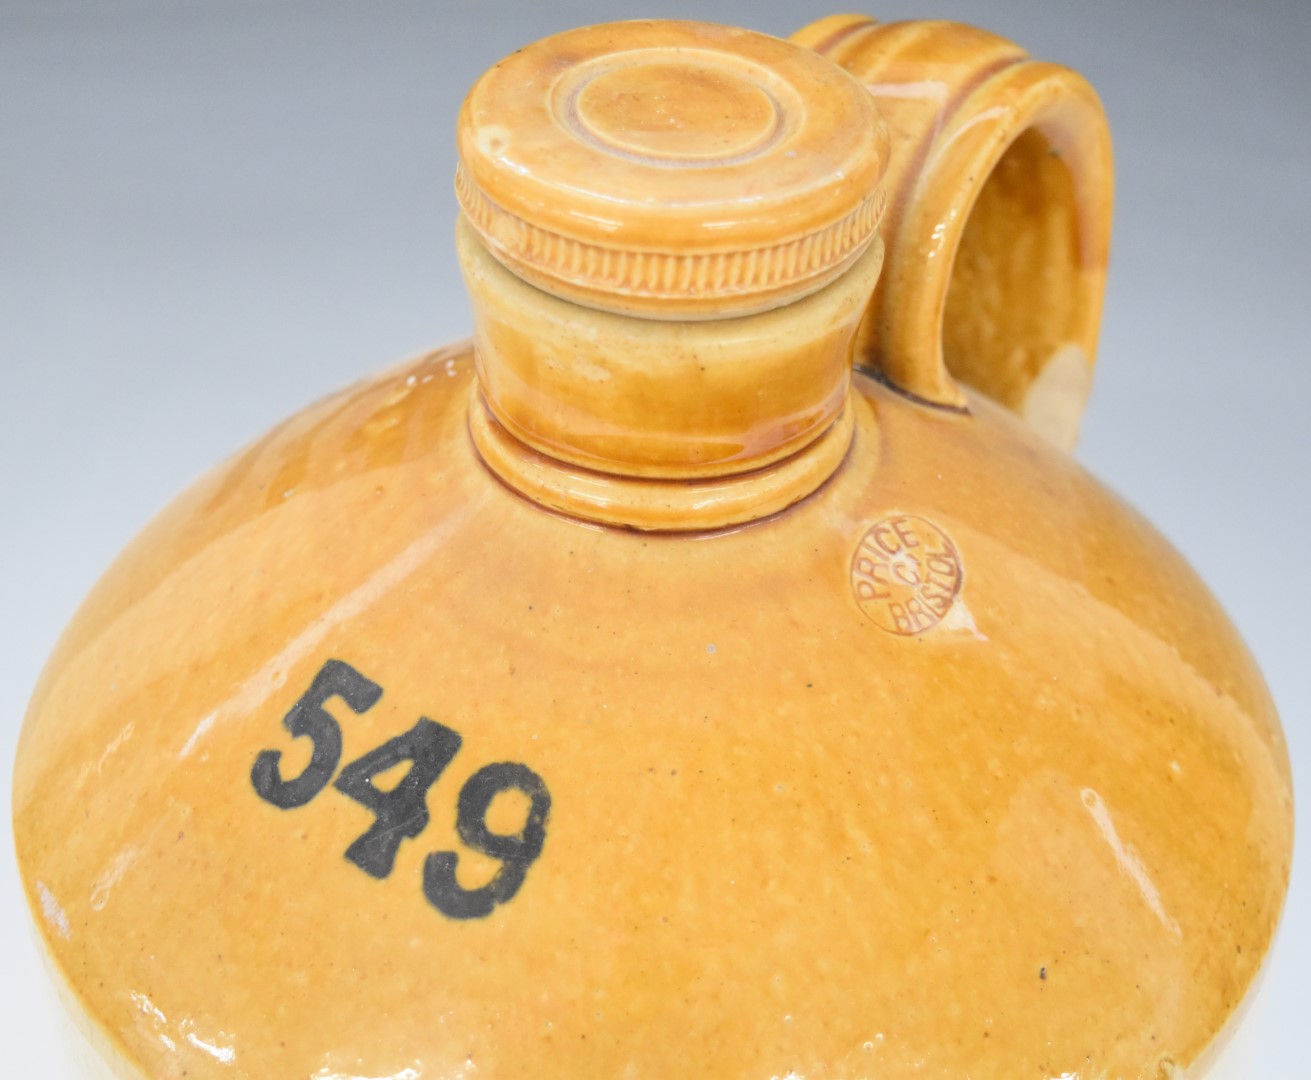 Shepherd's Distilled Wood Vinegar, Bristol stoneware flagon / jar, by Price and Co, Bristol, with - Image 4 of 7